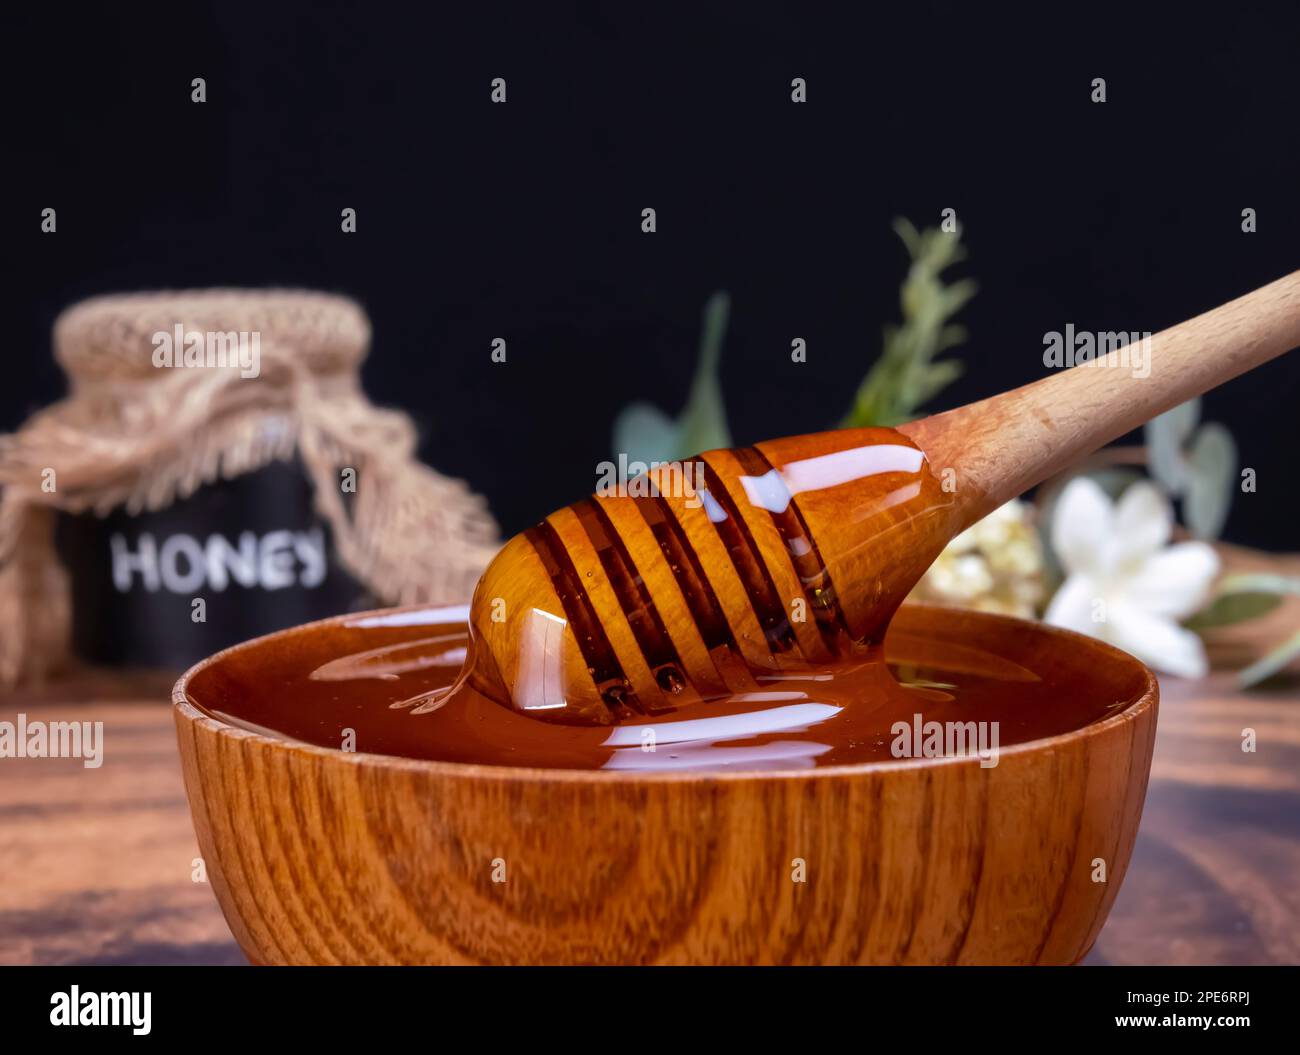 Honey spoon coming out of the bow full of honey. Honey contains many nutrients, antioxidants, improves heart health, wound care, offers antidepressant Stock Photo